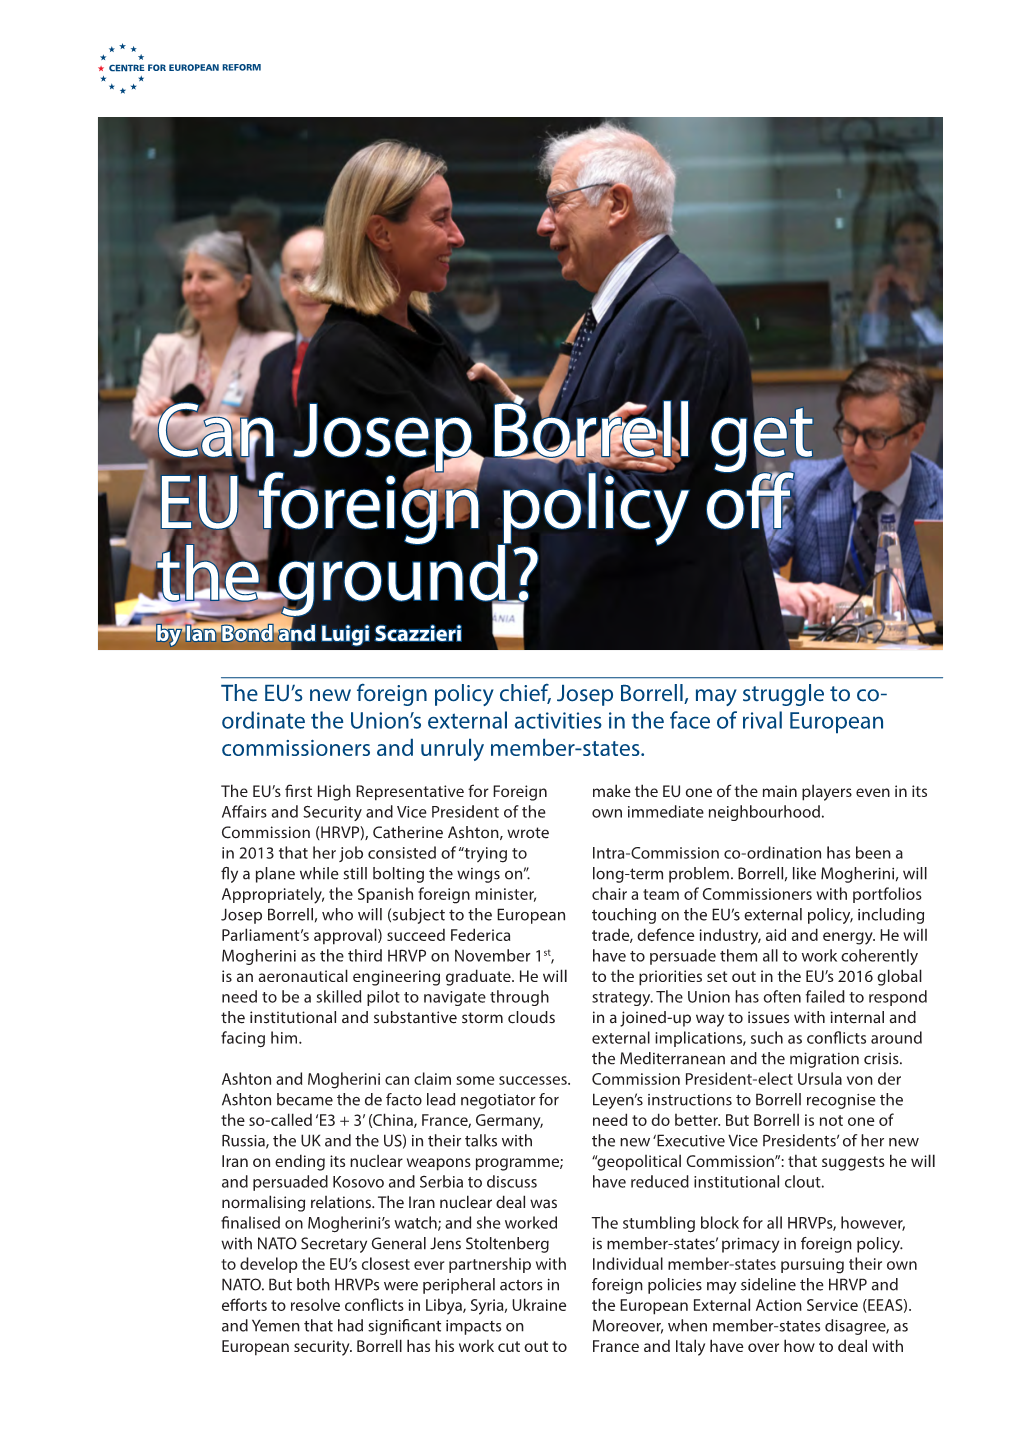 Can Josep Borrell Get EU Foreign Policy Off the Ground? by Ian Bond and Luigi Scazzieri